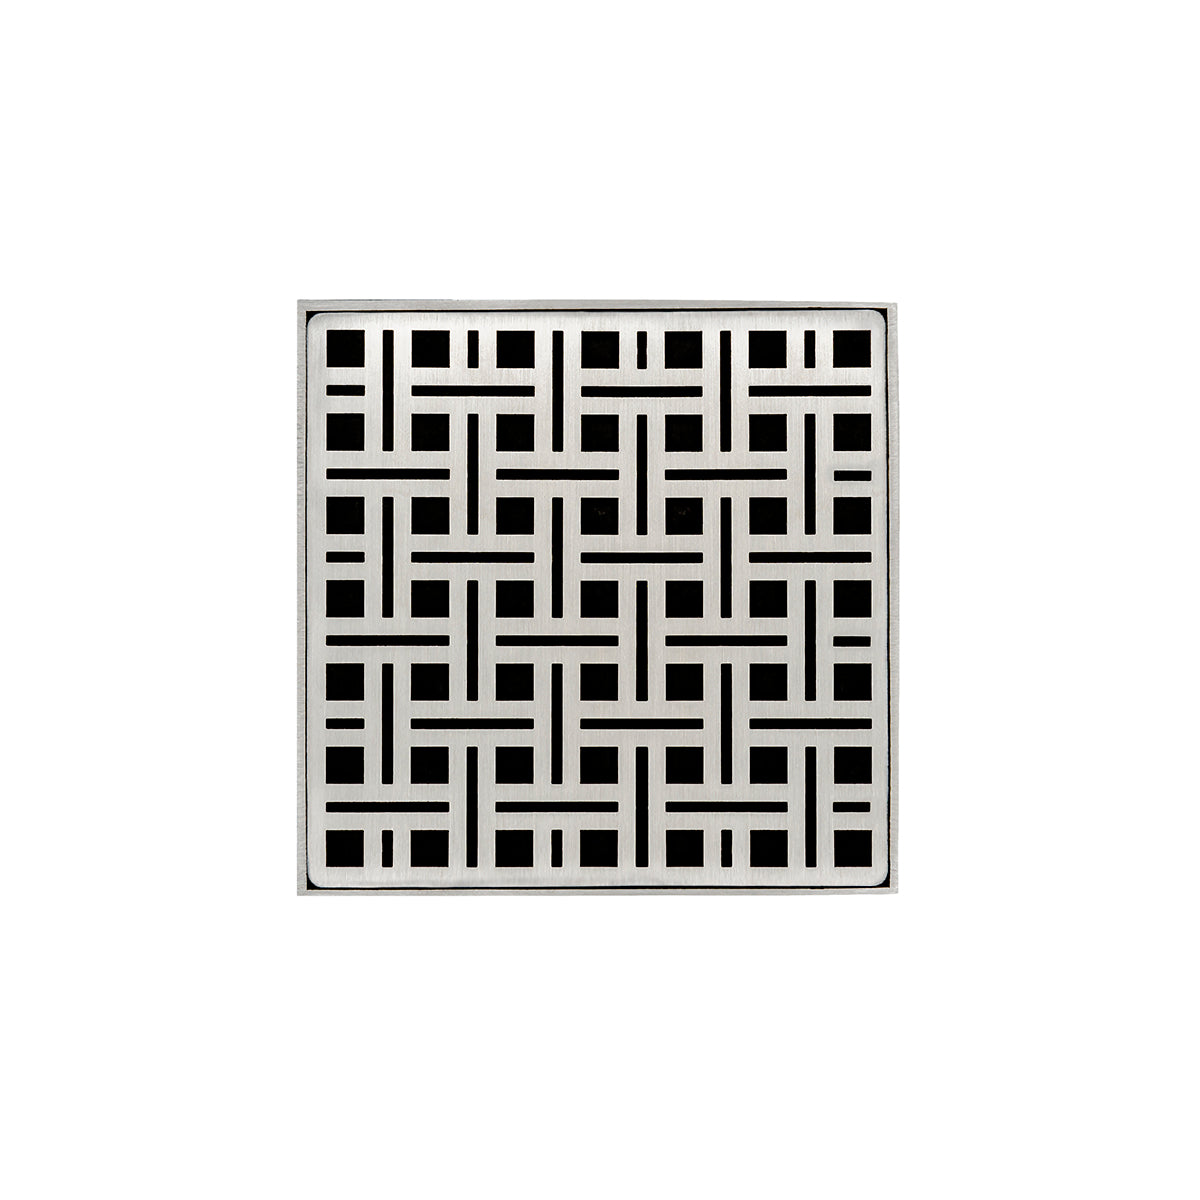 Infinity Drain 5" x 5" VD 5 High Flow Premium Center Drain Kit with Weave Pattern Decorative Plate with Cast Iron Drain Body, 3" No-Hub Outlet